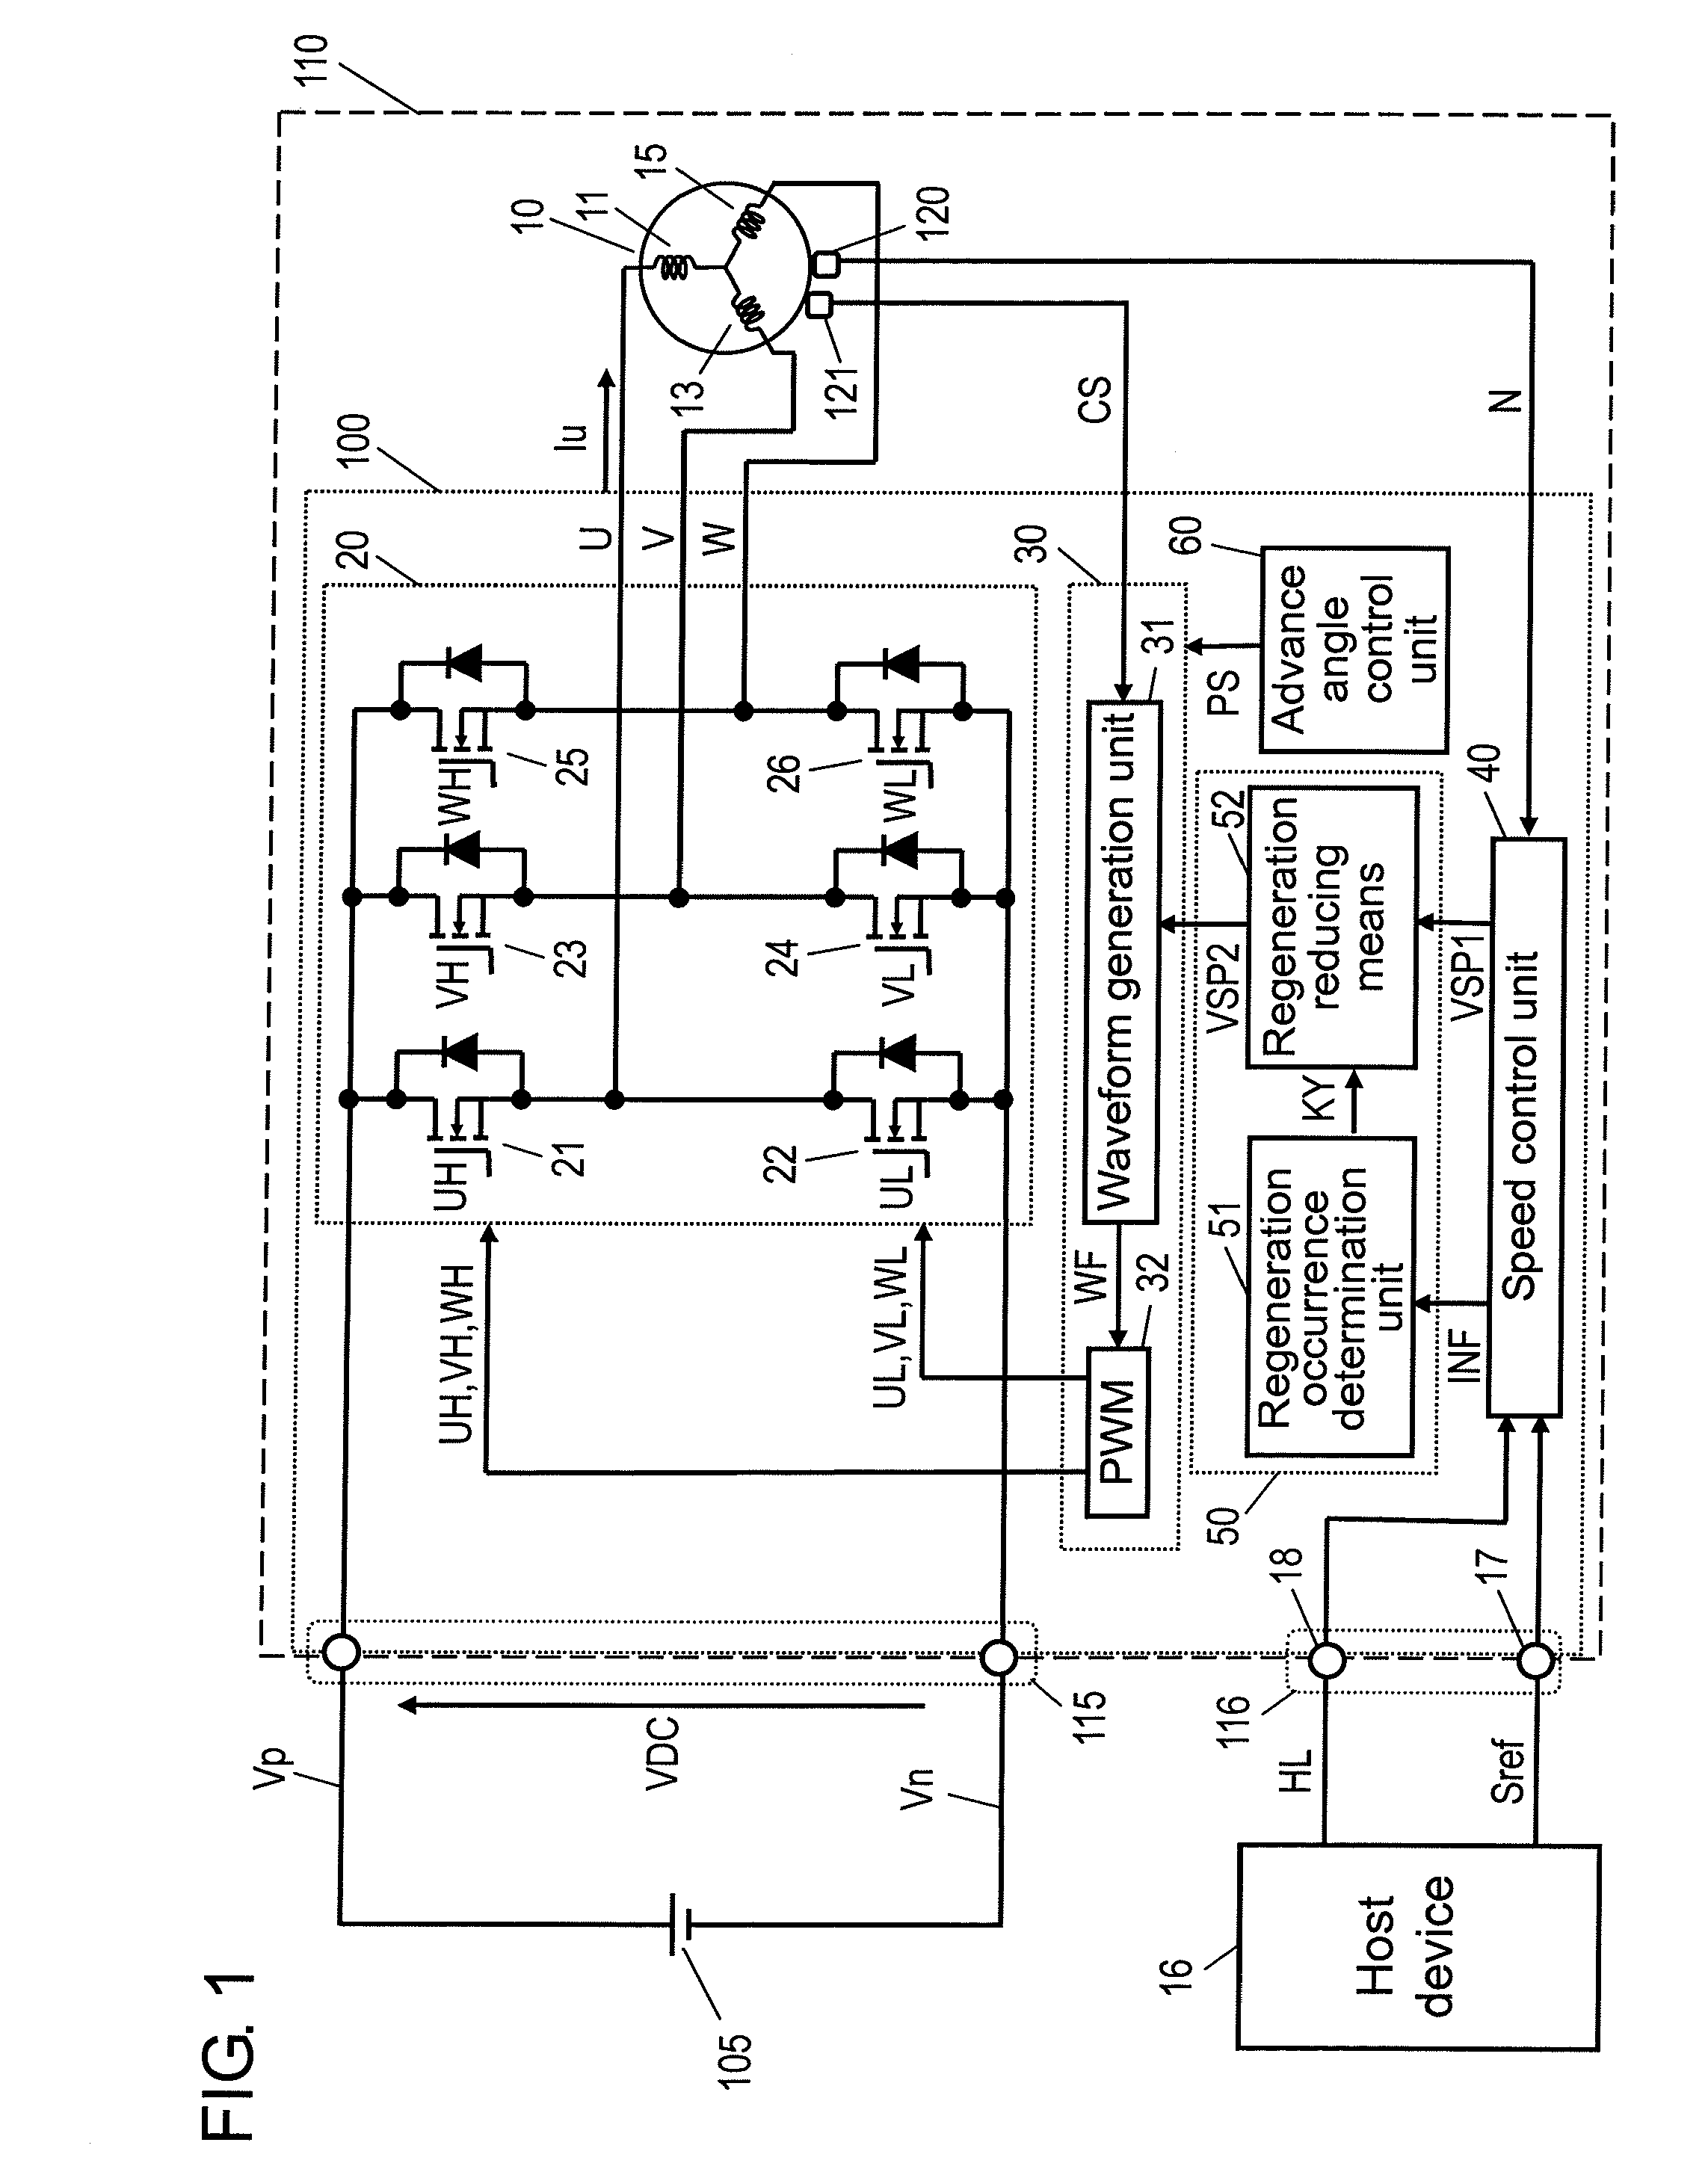 Motor driving device, motor device, and integrated circuit device